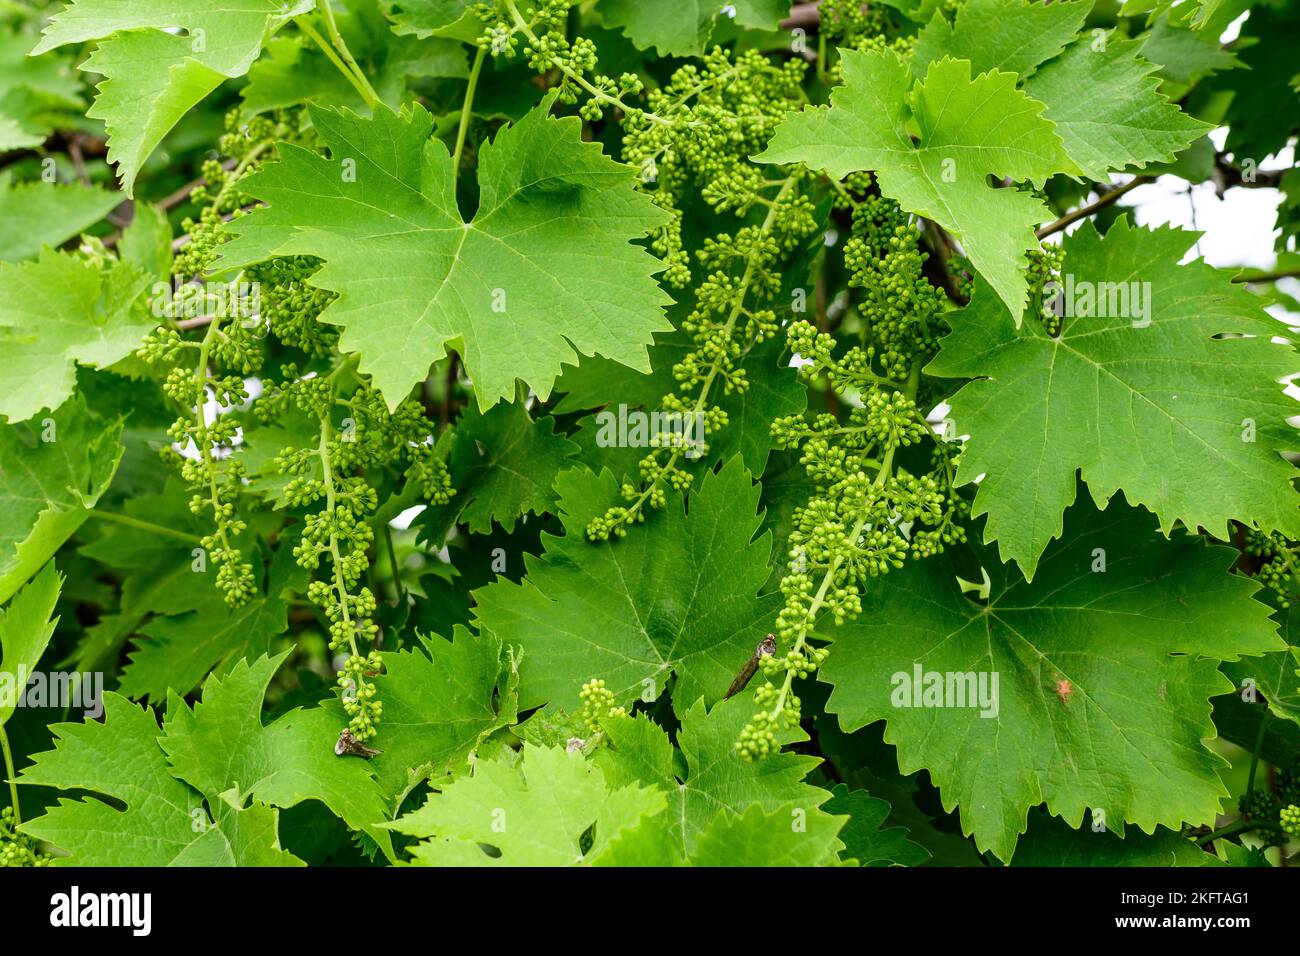 Delicate small fruits and green leaves of grape vine in a sunny summer garden, beautiful outdoor monochrome background photographed with selective foc Stock Photo